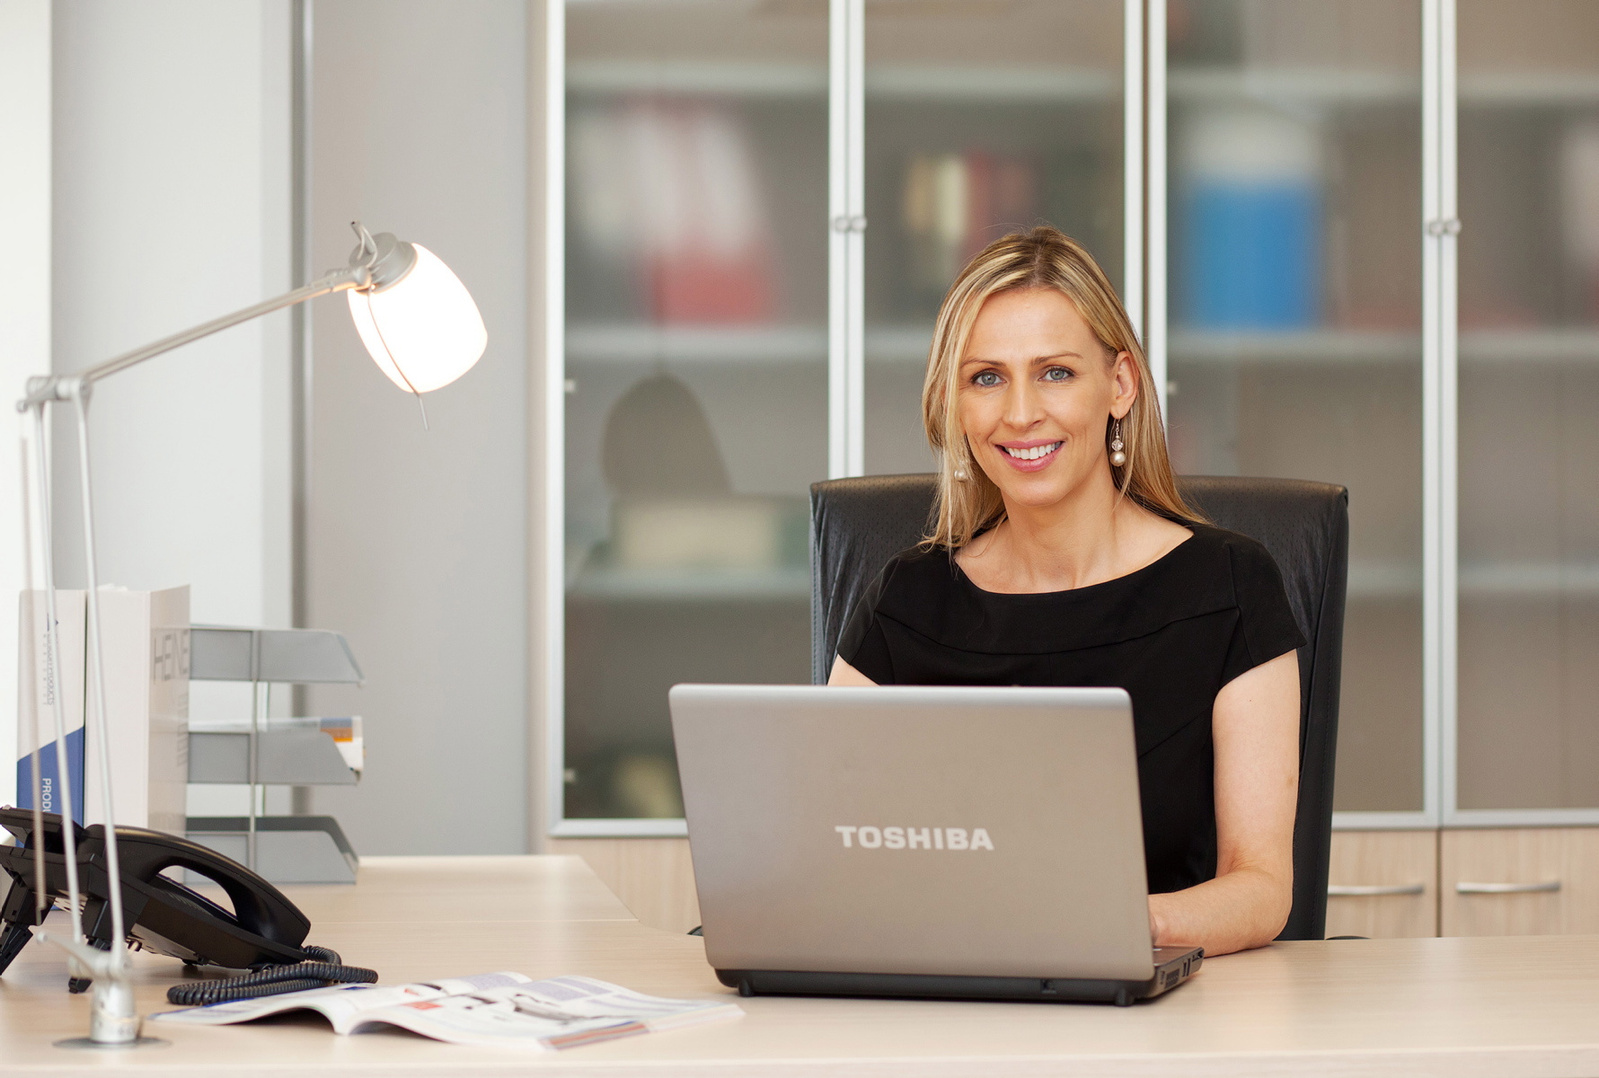 Corporate business portrait photography. Businesswoman in office environment working at laptop professional portrait for website